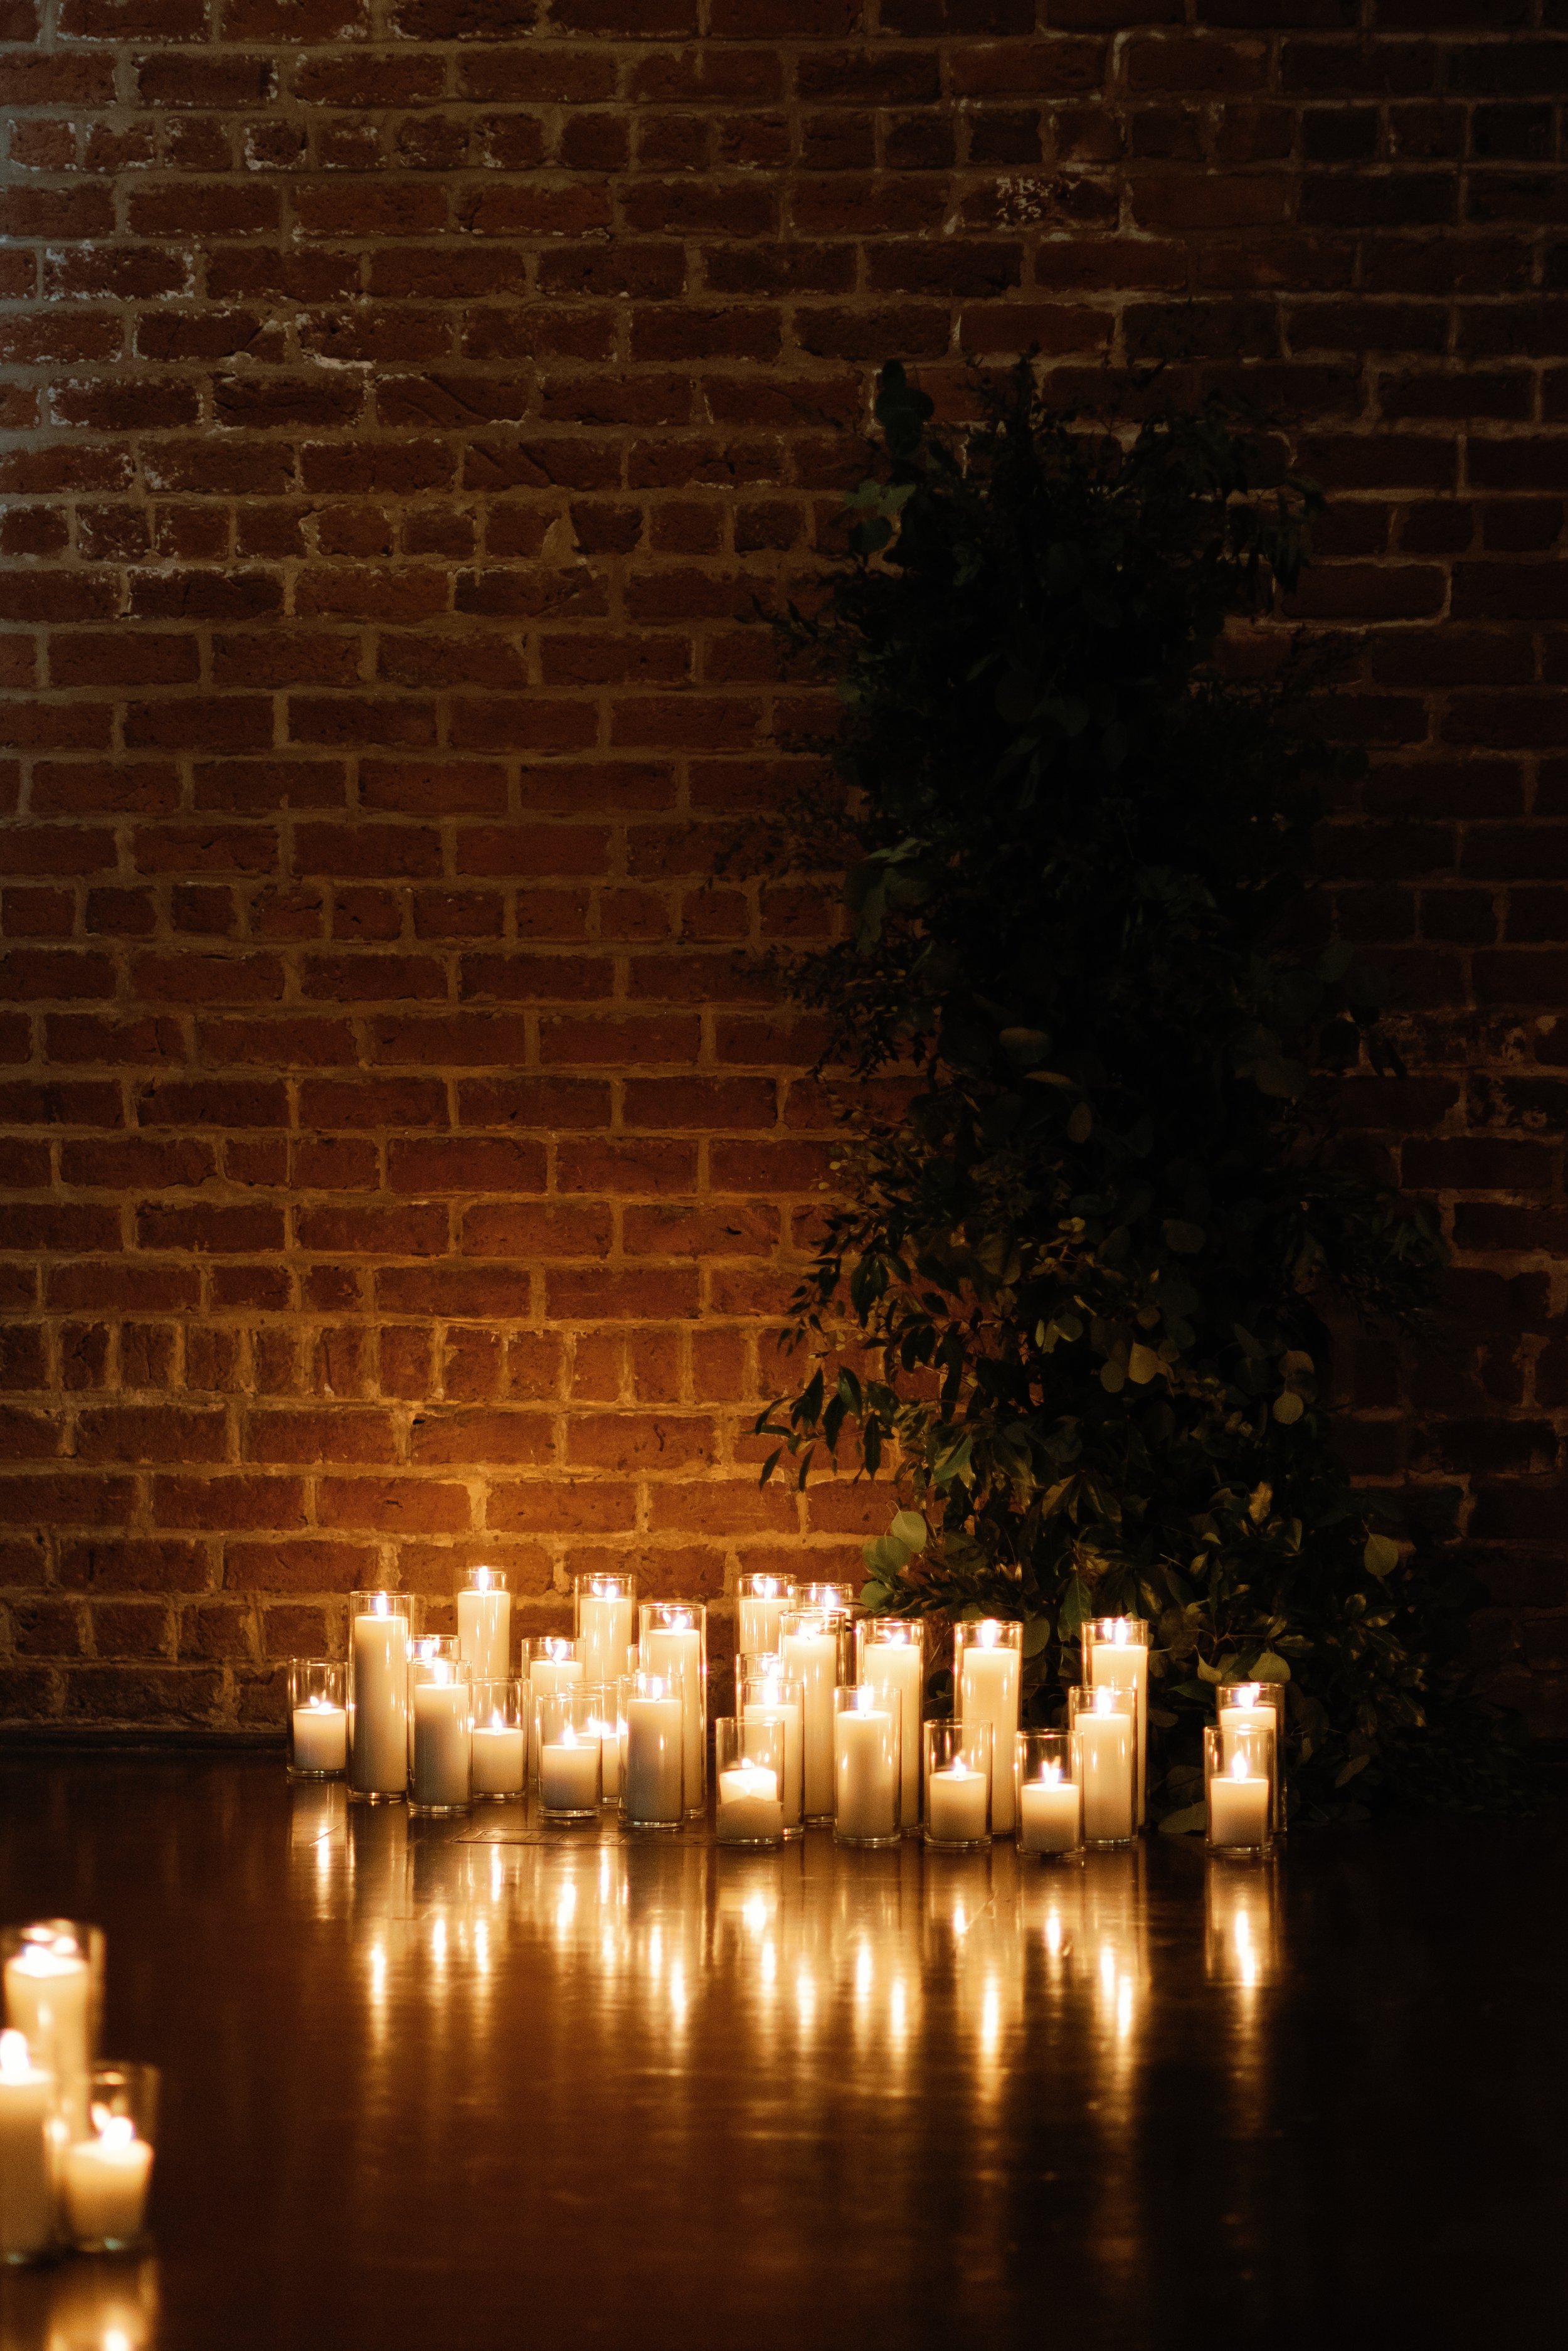 bailee-and-macs-romantic-candlelit-wedding-ceremony-at-the-charles-h-morris-center-planned-by-savannah-wedding-planner-and-florist-ivory-and-beau-19.jpg